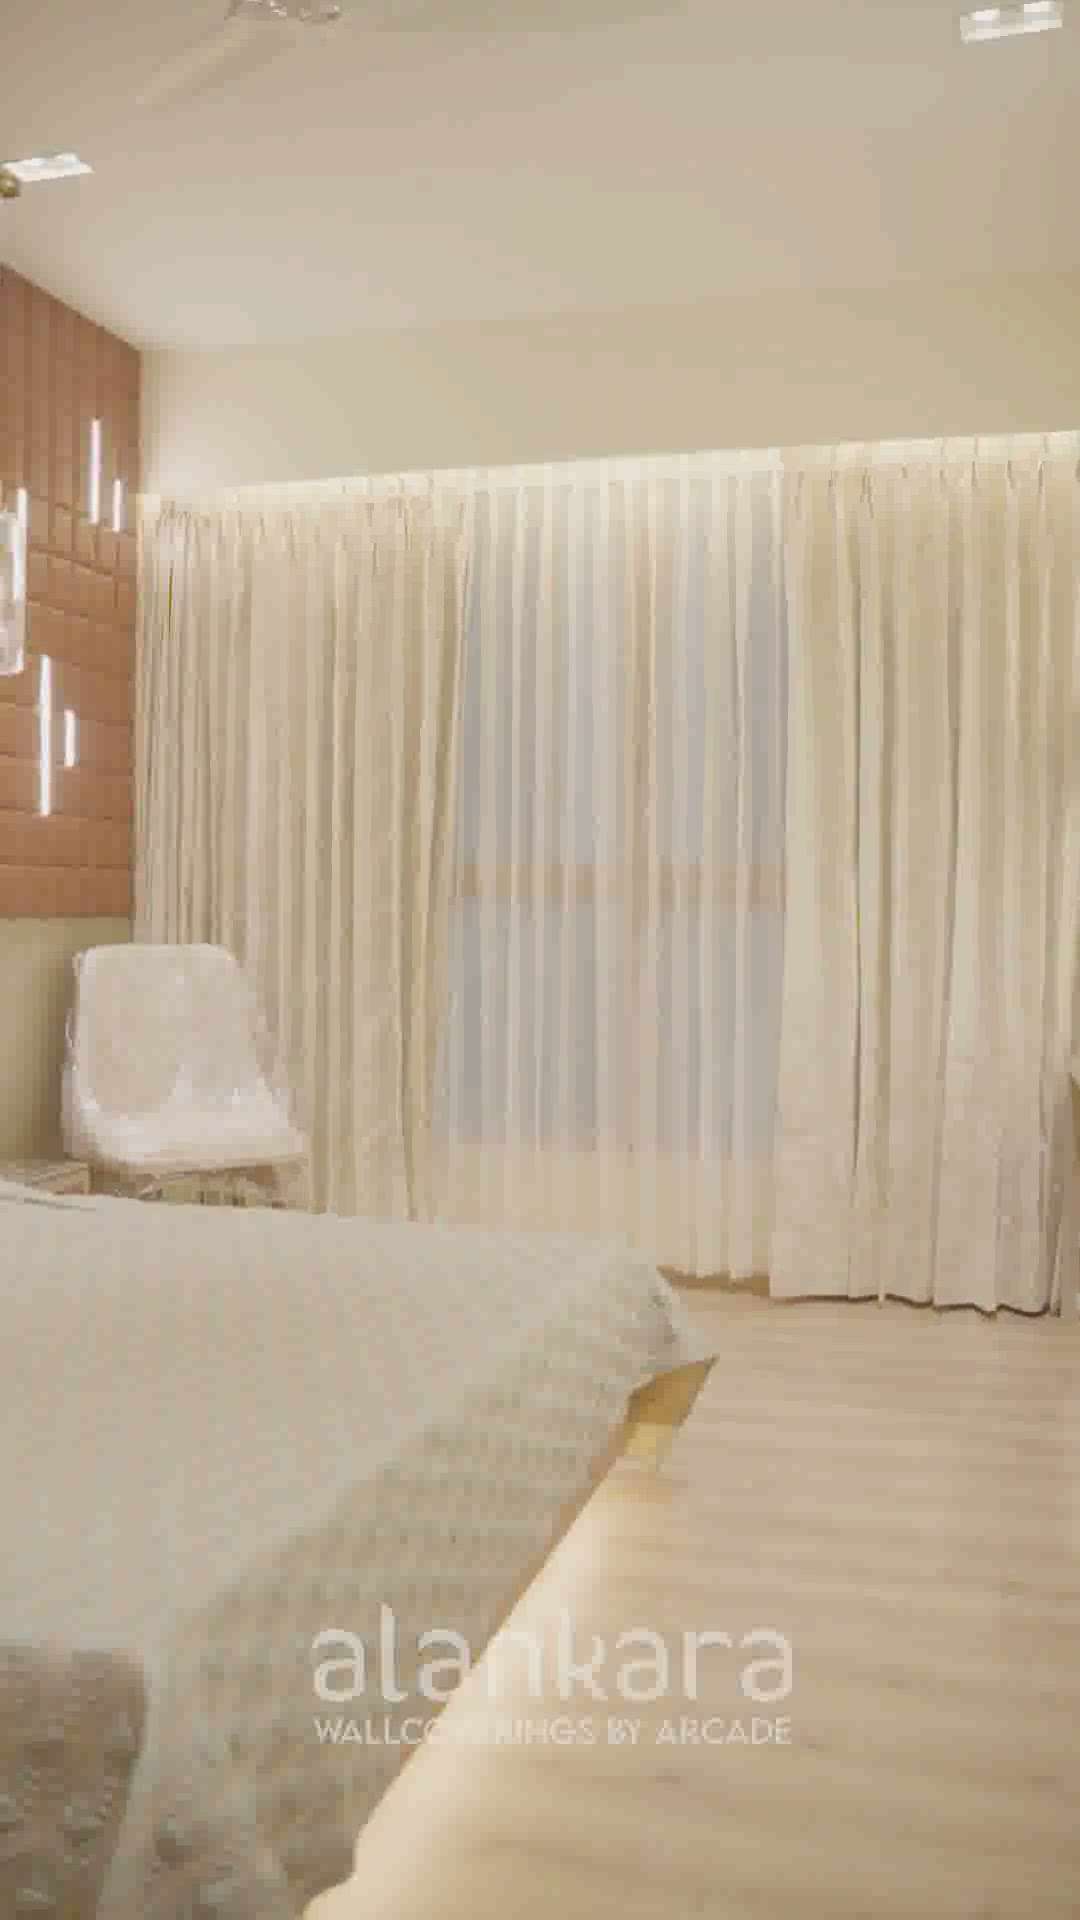 Alankara presents unparalleled technology 

Automated Curtain for your ease and comfort.

Now opening the curtains of a marvellous world

Wonderful Walls. Wonderful Homes. Alankara Promise

ᴅo ᴠisit ᴏur ꜱhowroom at
Cochin
Alankara Wallcovering
Near Pulinchod Metro Station, Metro Pillar No 76, Aluva, Kochin,Kerala 683101
Ph: 8089181314,
9995340439
*
*
*
Do ᴠisit ᴏur ꜱhowroom at
Bengalore
Alankara Wallcovering
8/9 First Floor, Oppo Mahaveer Ranches, Hosa Road, Bengalore 560100
Ph: 8129773421,
9995340439